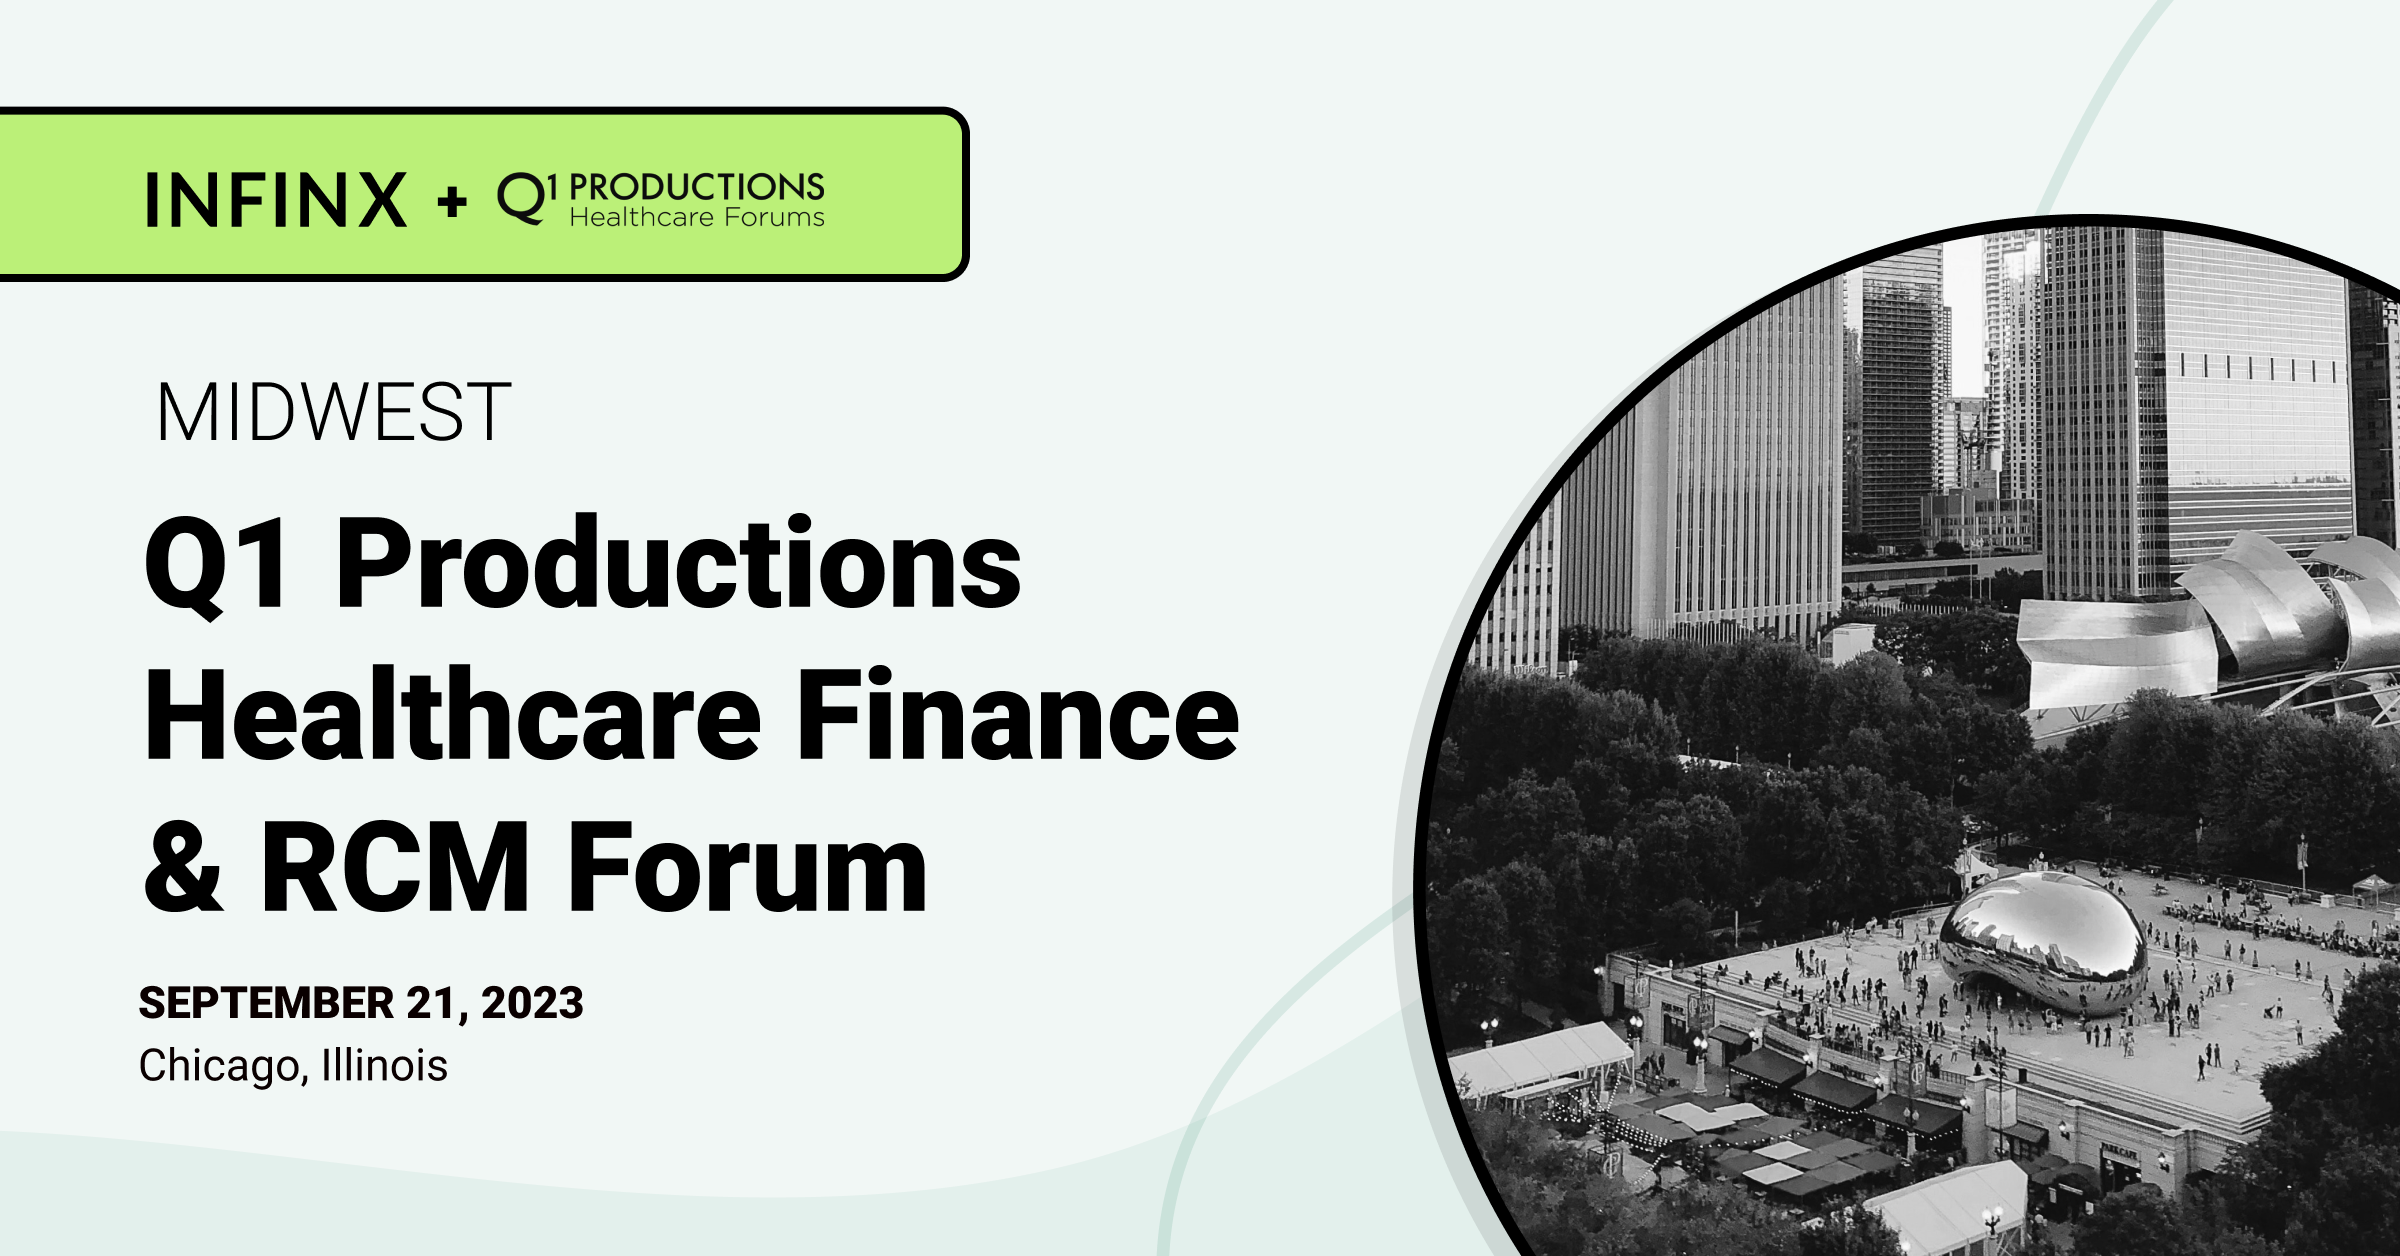 Infinx - Tradeshow Event - Q1 Productions Healthcare Finance And RCM Forum